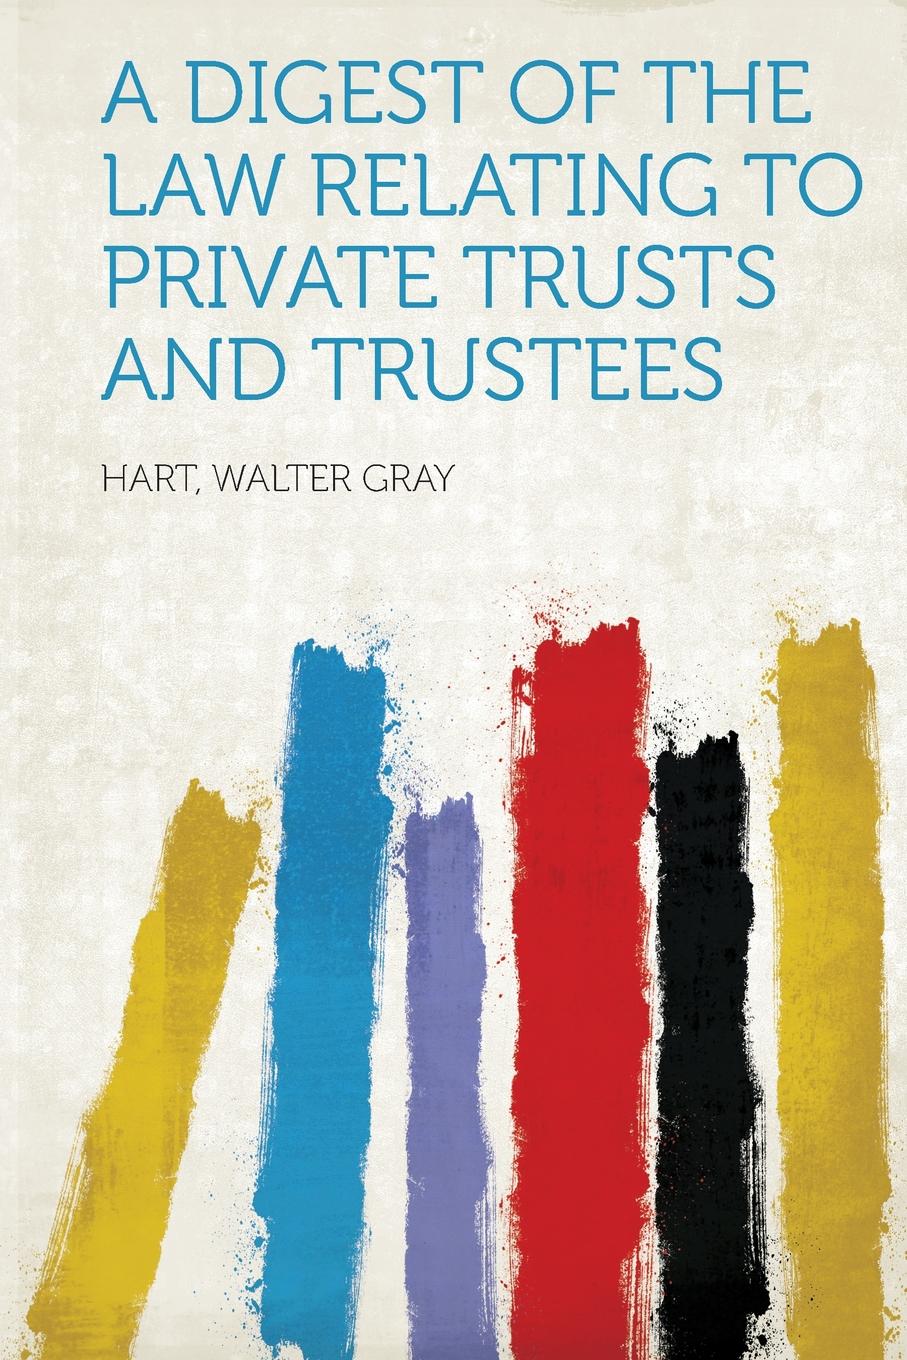 A Digest of the Law Relating to Private Trusts and Trustees